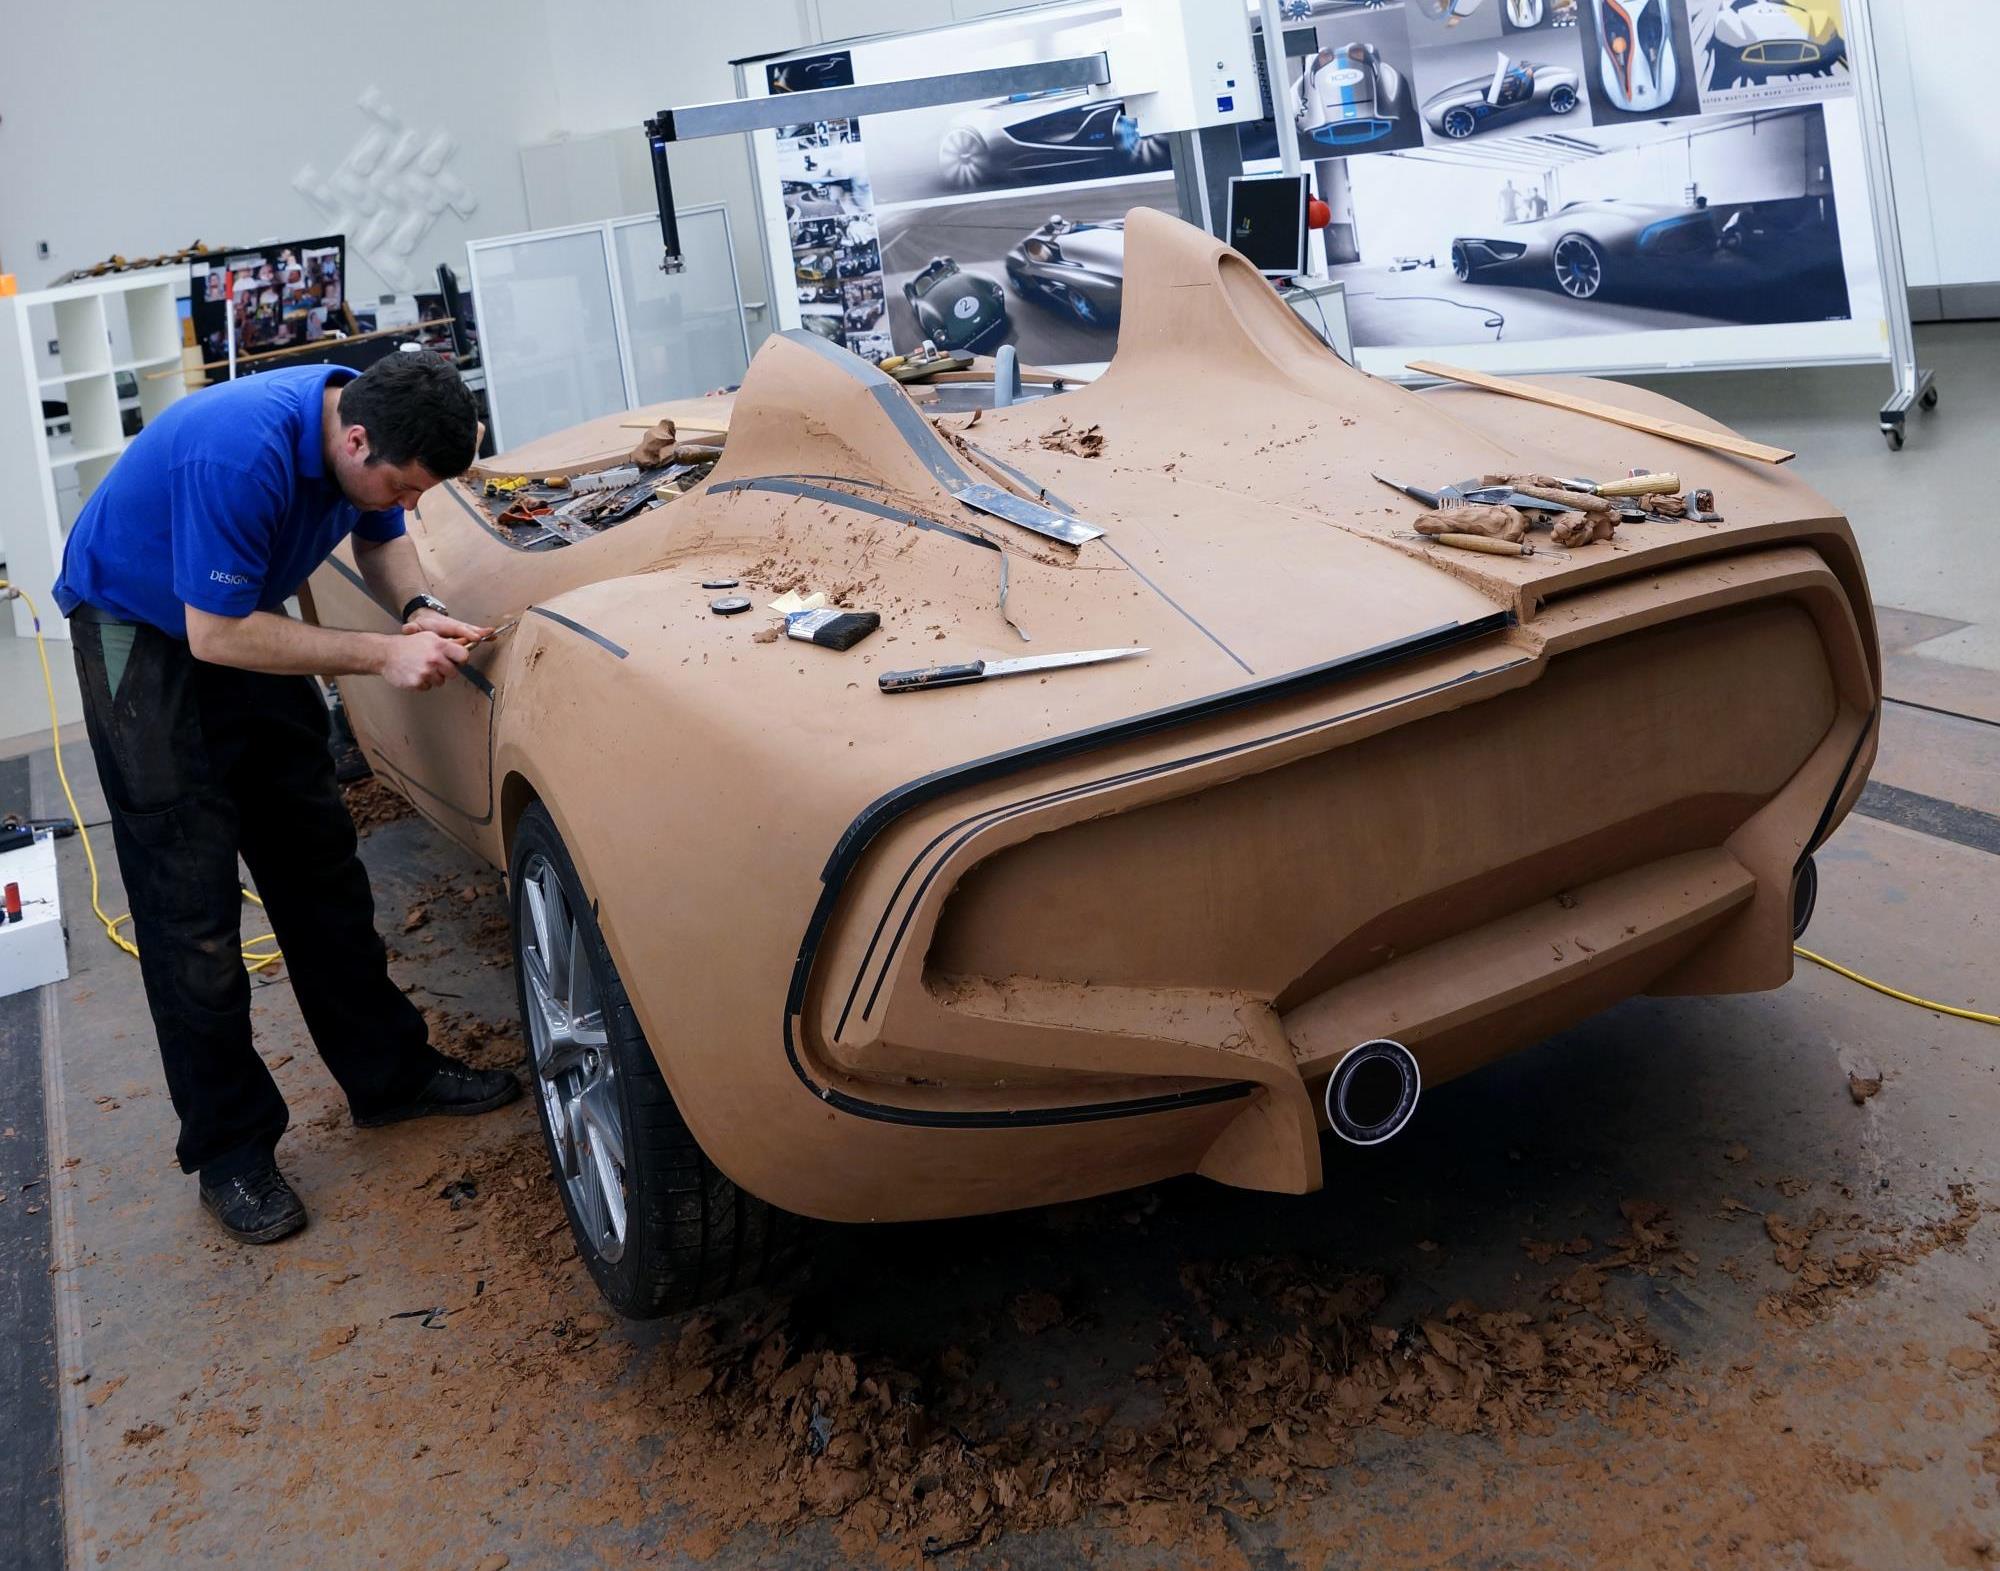 Aston Martin shapes its future with new apprentices